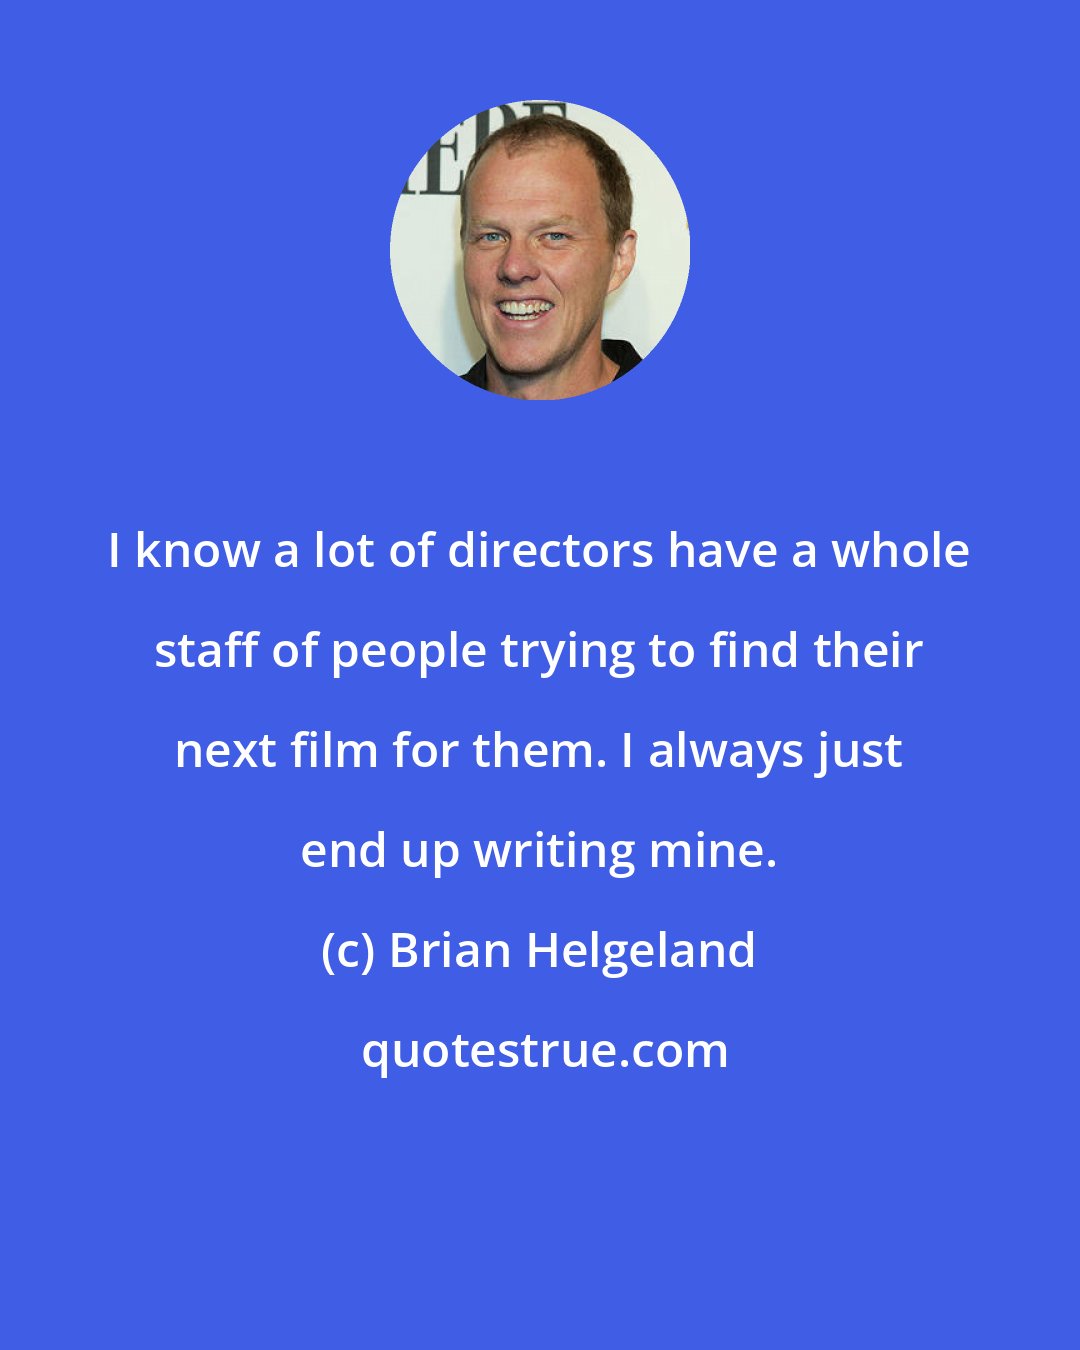 Brian Helgeland: I know a lot of directors have a whole staff of people trying to find their next film for them. I always just end up writing mine.